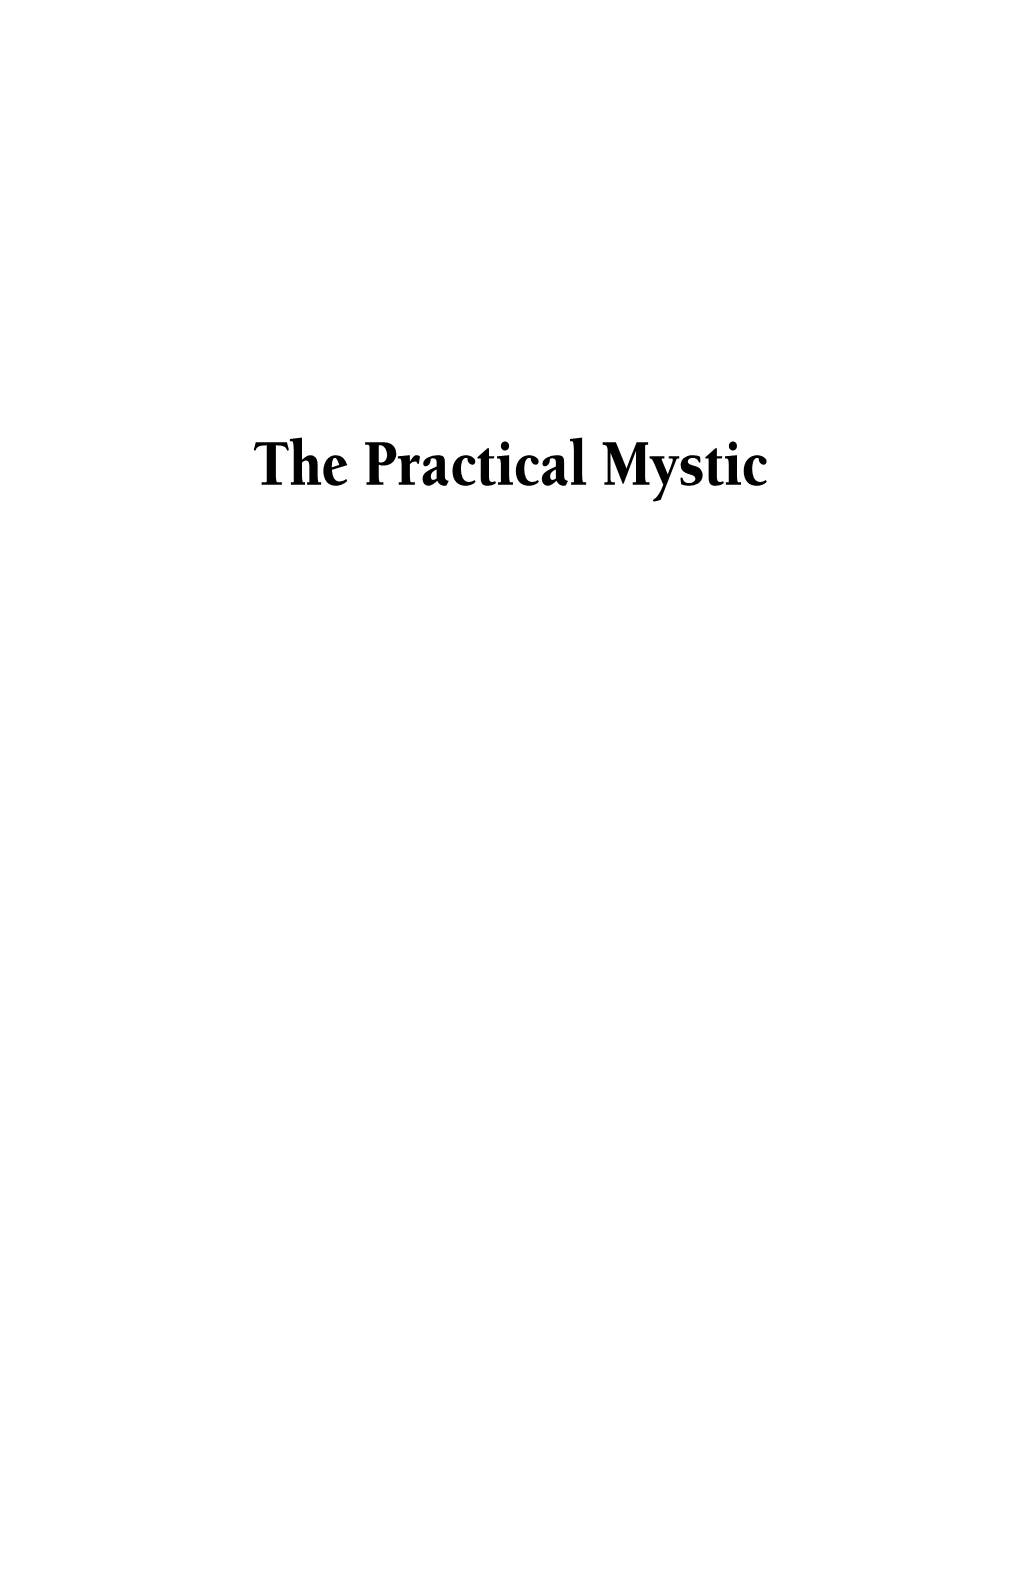 The Practical Mystic